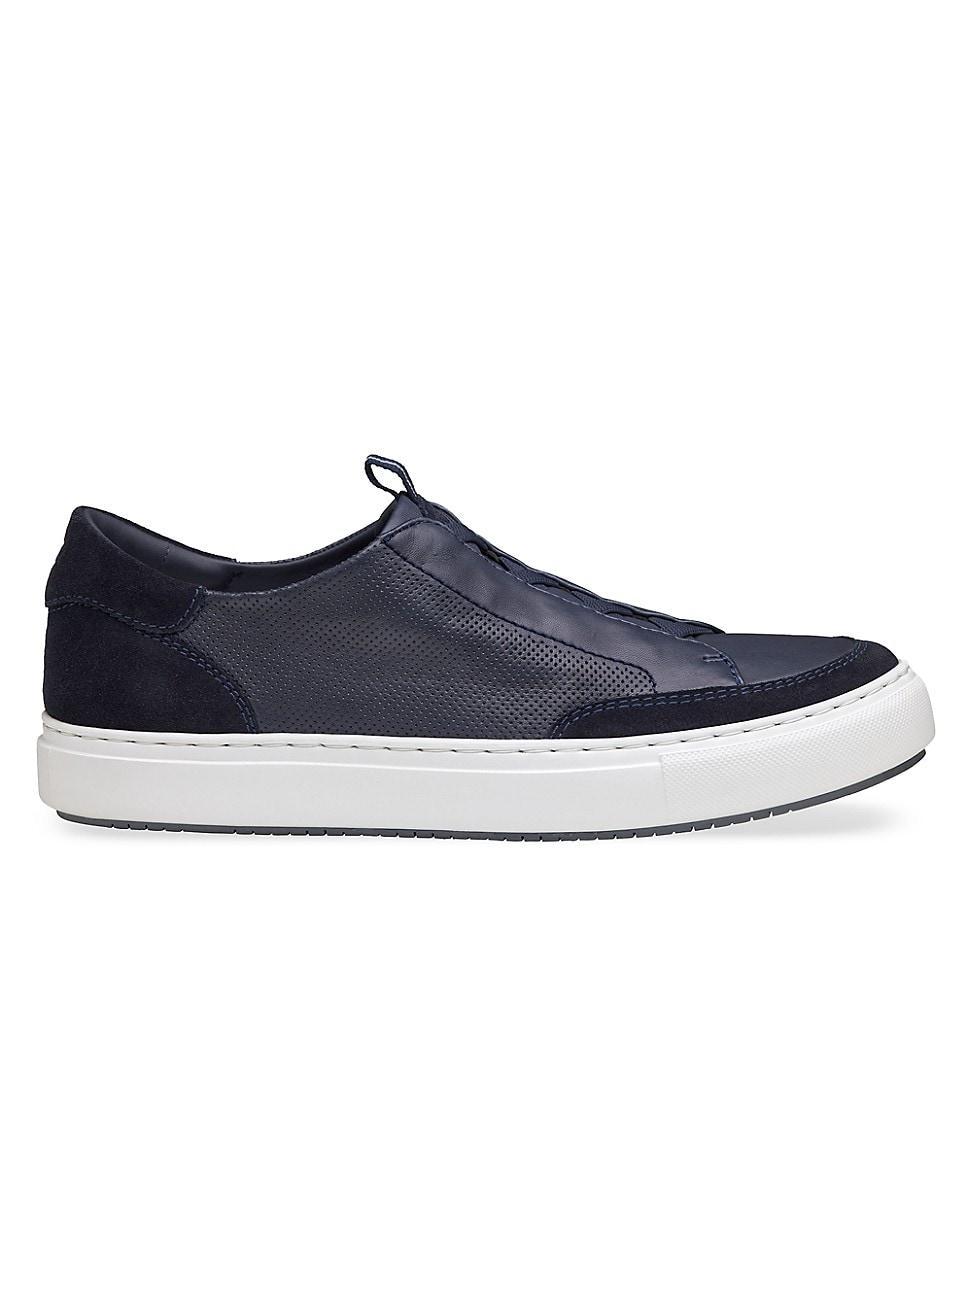 J & M COLLECTION Johnston & Murphy Anson Lace to Toe Sneaker Product Image